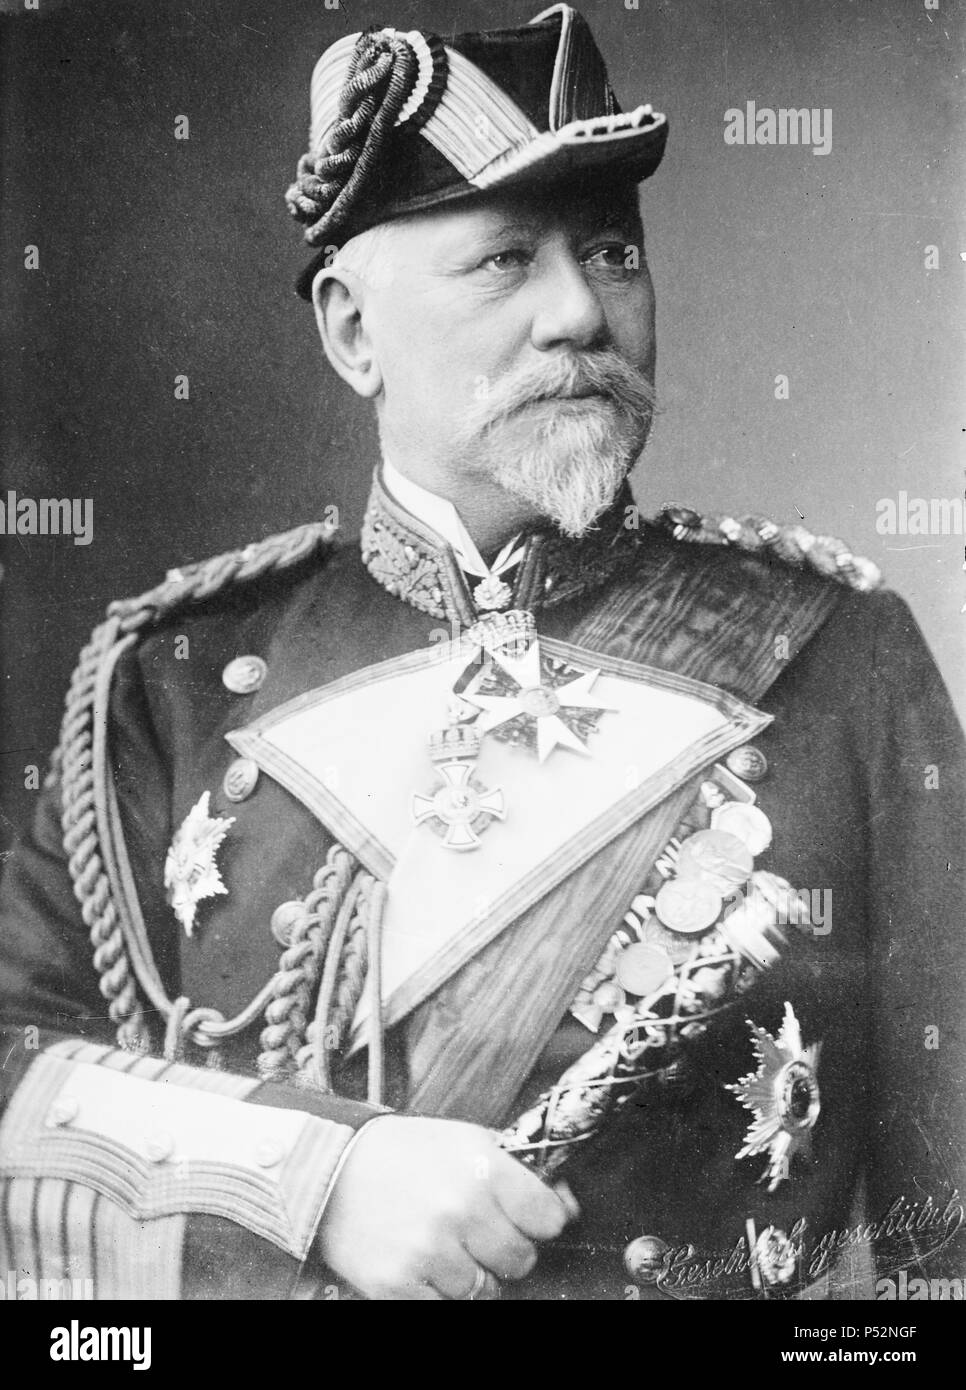 Admiral Koester - Hans Ludwig Raimund von Koester (29 April 1844 – 21 February 1928) was a German naval officer who served in the Prussian Navy and later in the Imperial German Navy. He retired as a Grand Admiral. Stock Photo